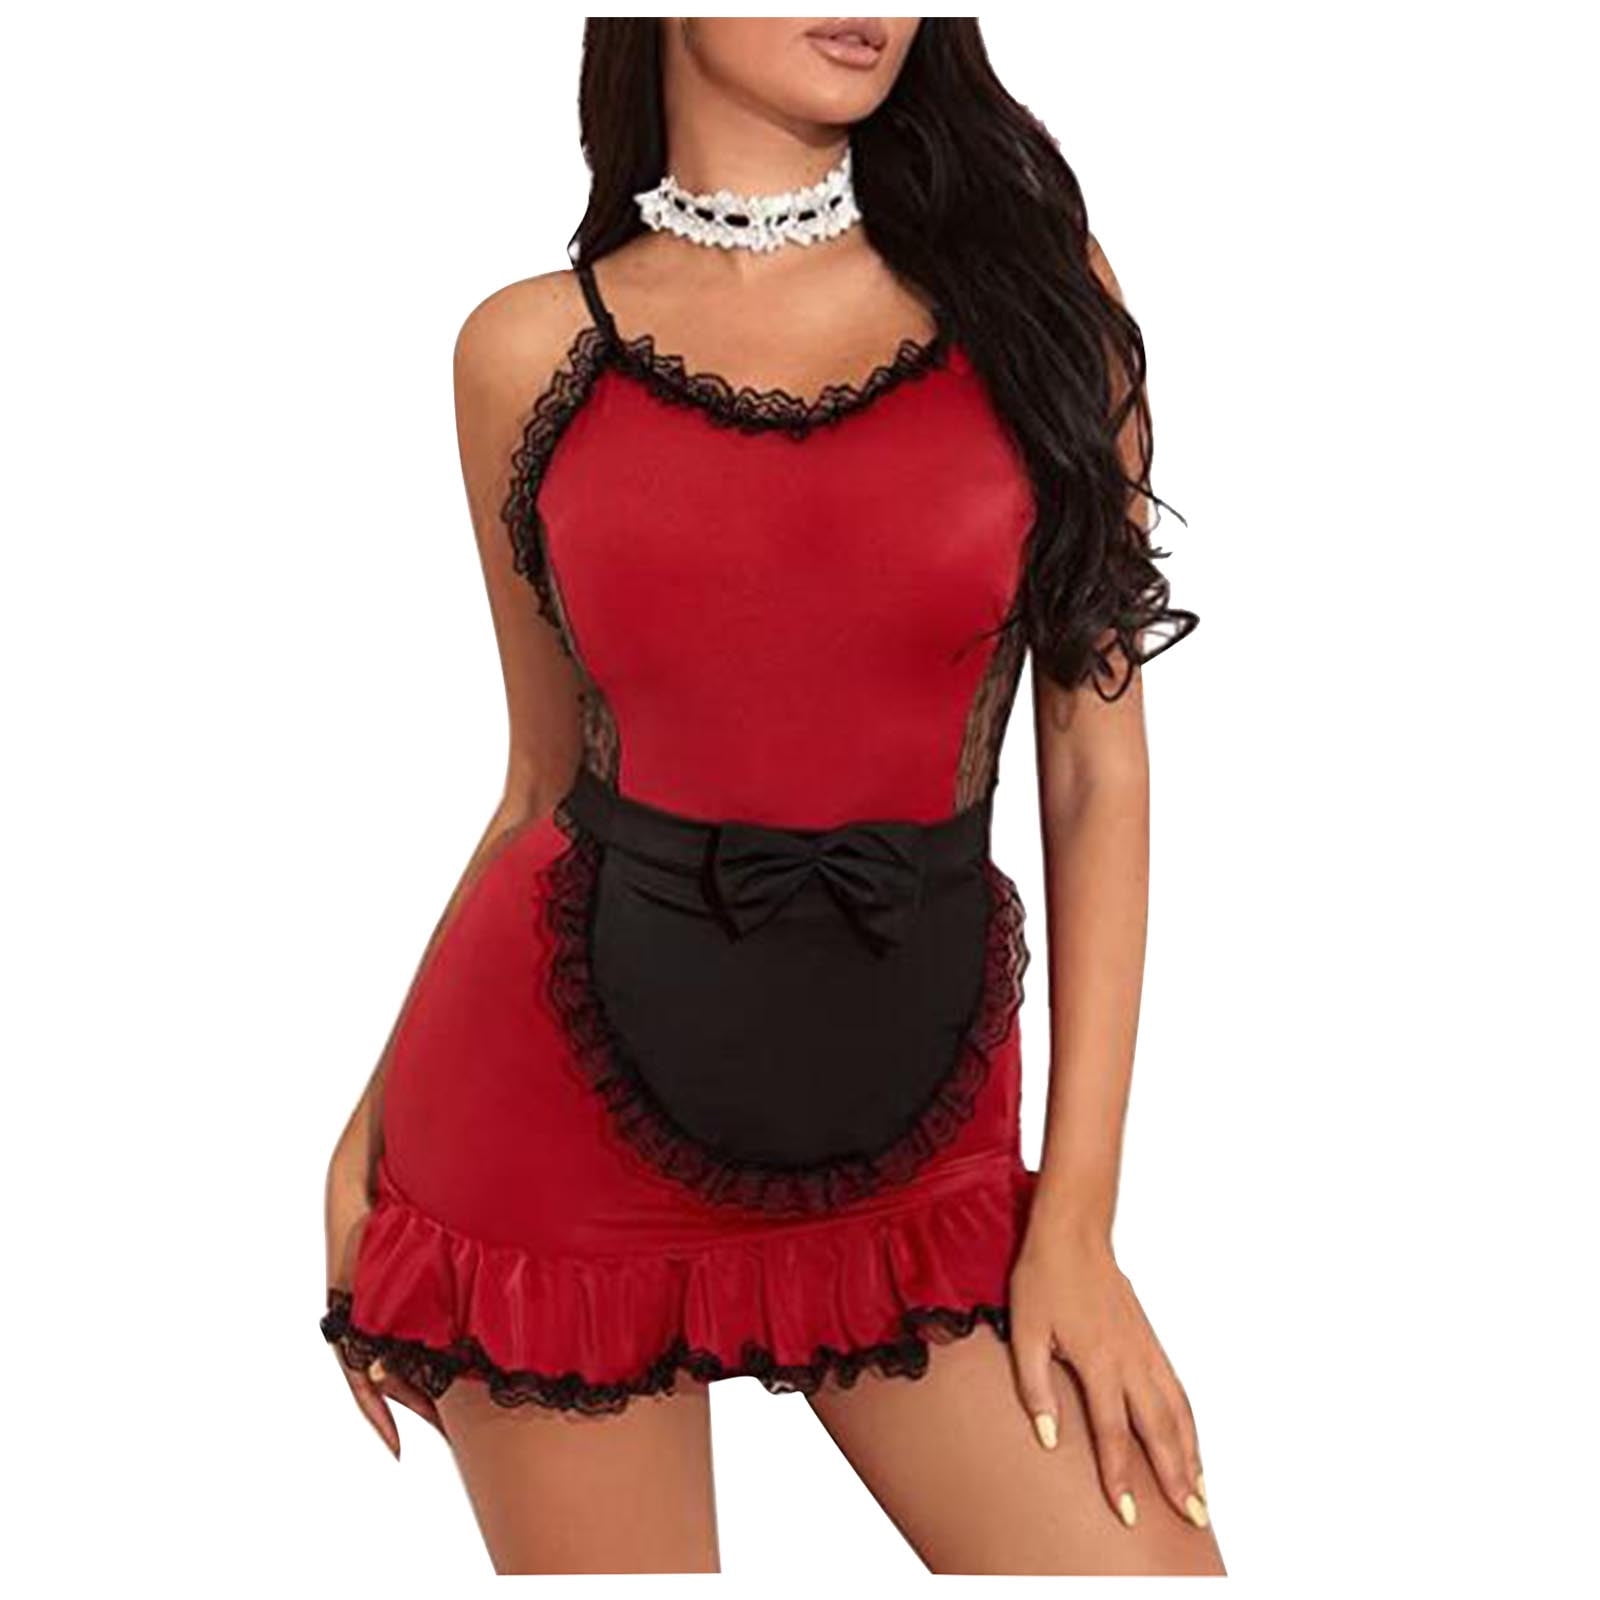 REORIAFEE Sexy Women Lingerie Sex Couple Naughty Play Babydoll Cocktail Party Cute Girl Erotic Lingerie Spaghetti Straps Lace Zipper Maid Costume Dress Apron Red S